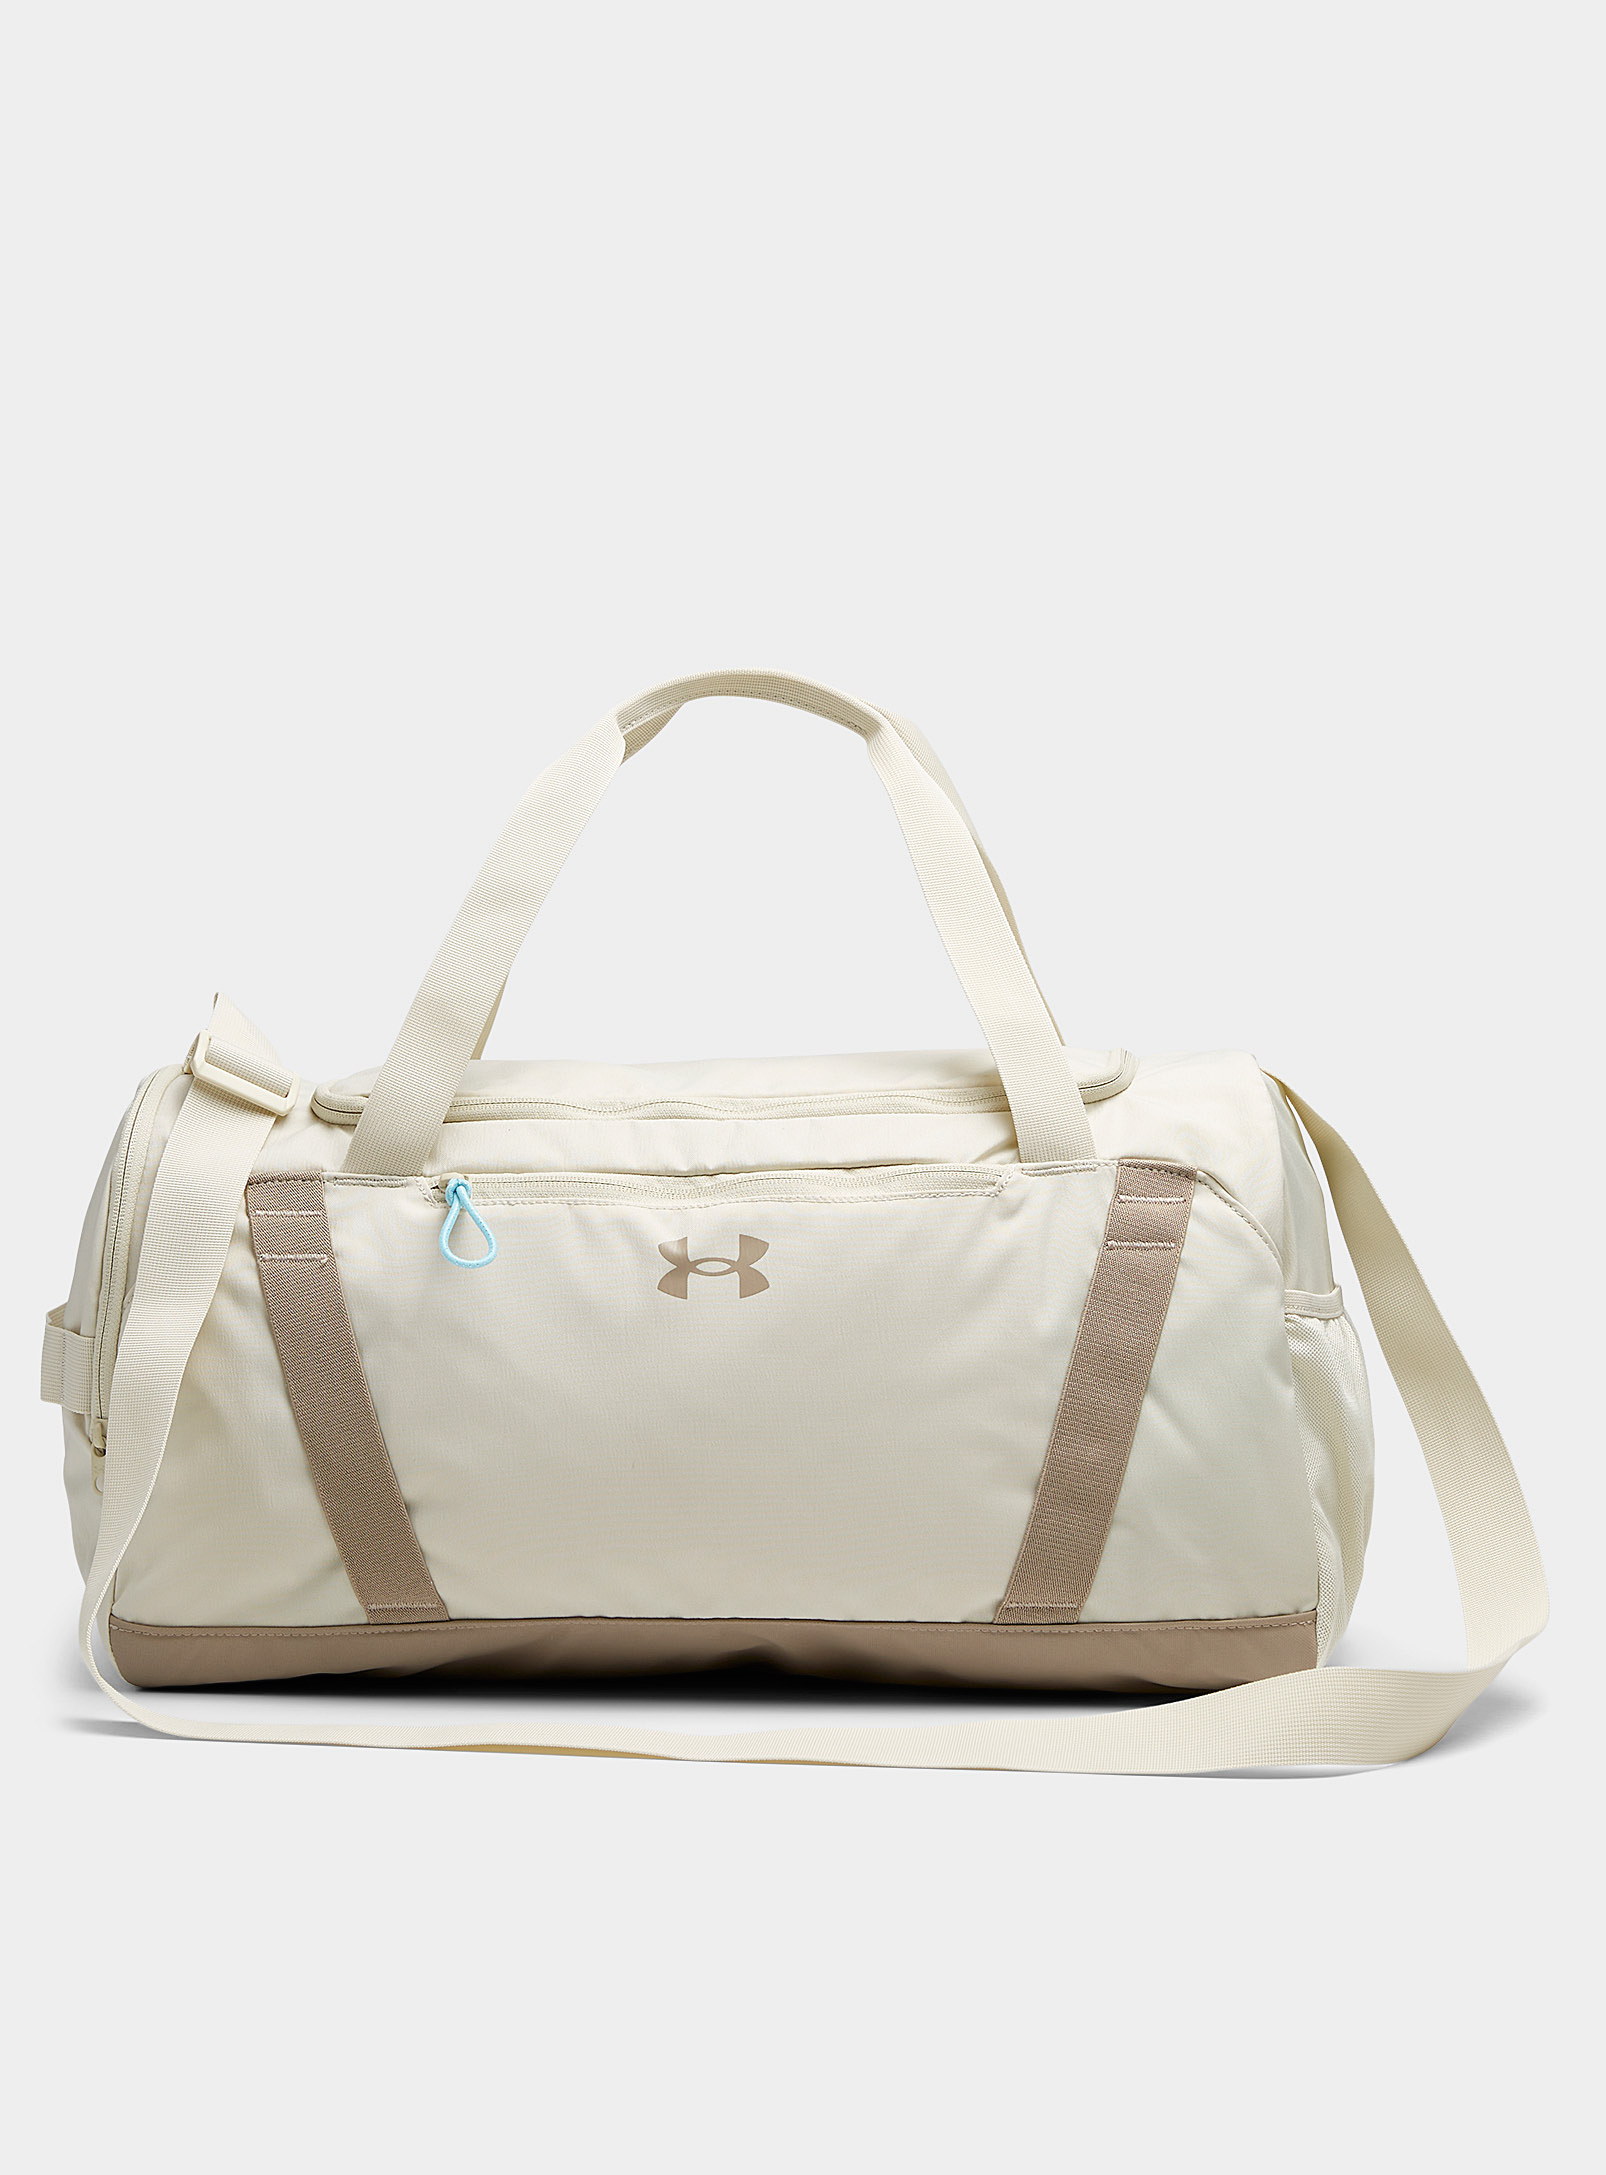 Under Armour Undeniable Gym Bag In White